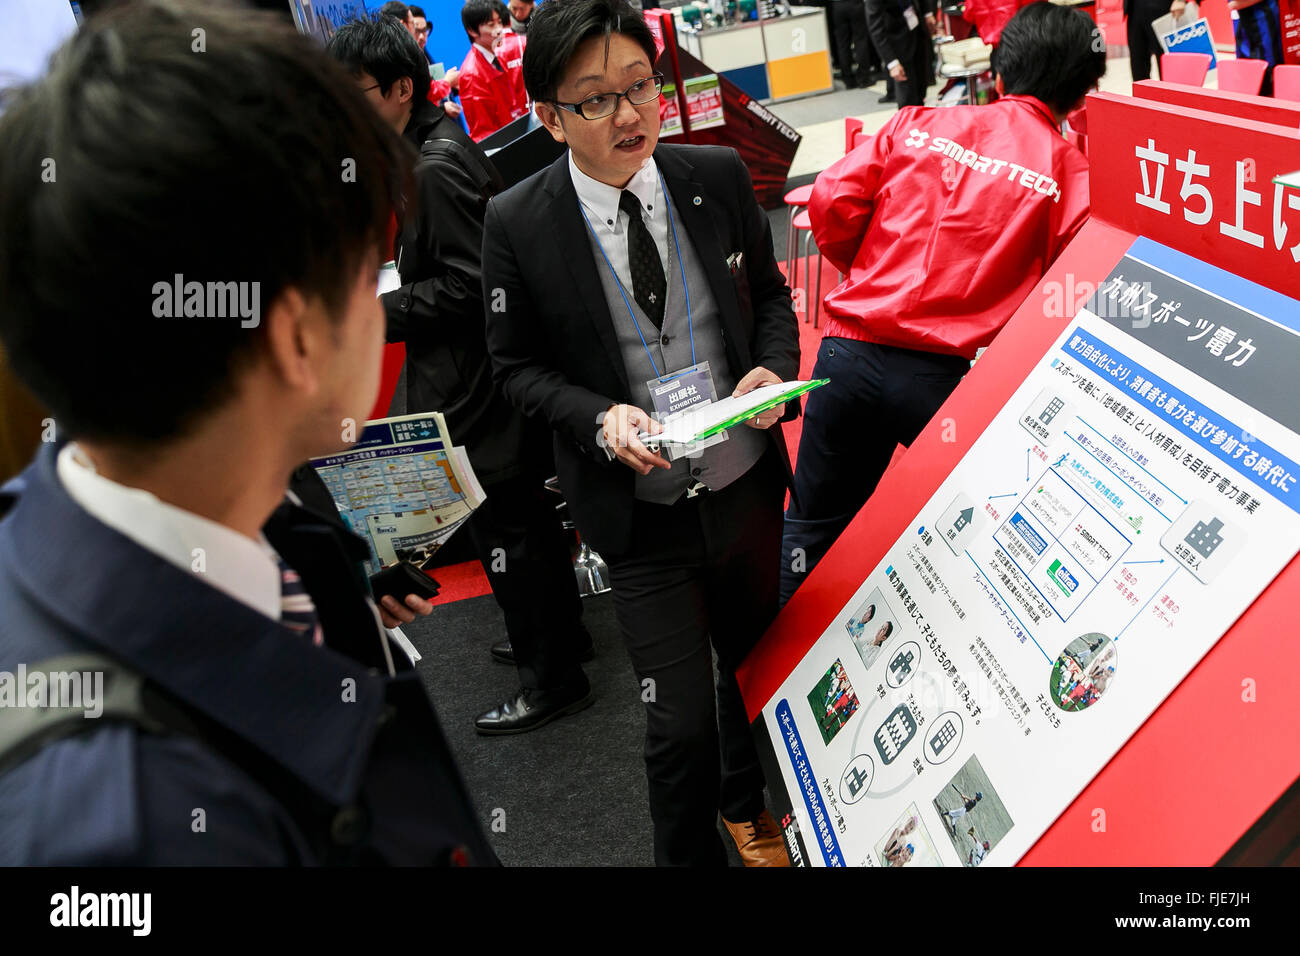 An exhibitor introduces Smart Tech energy services to a visitor during the 2nd Energy Market Liberalisation Expo in Tokyo Big Sight on March 2, 2016, Tokyo, Japan. Japan's electricity market will be opened up for the first time from April 2016 with new and existing suppliers allowed to compete for customers. It is hoped that deregulation will break up existing monopolies and drive down prices. The exhibition is part of World Smart Energy Week 2016 which organises various energy related shows and runs until March 4th. © Rodrigo Reyes Marin/AFLO/Alamy Live News Stock Photo